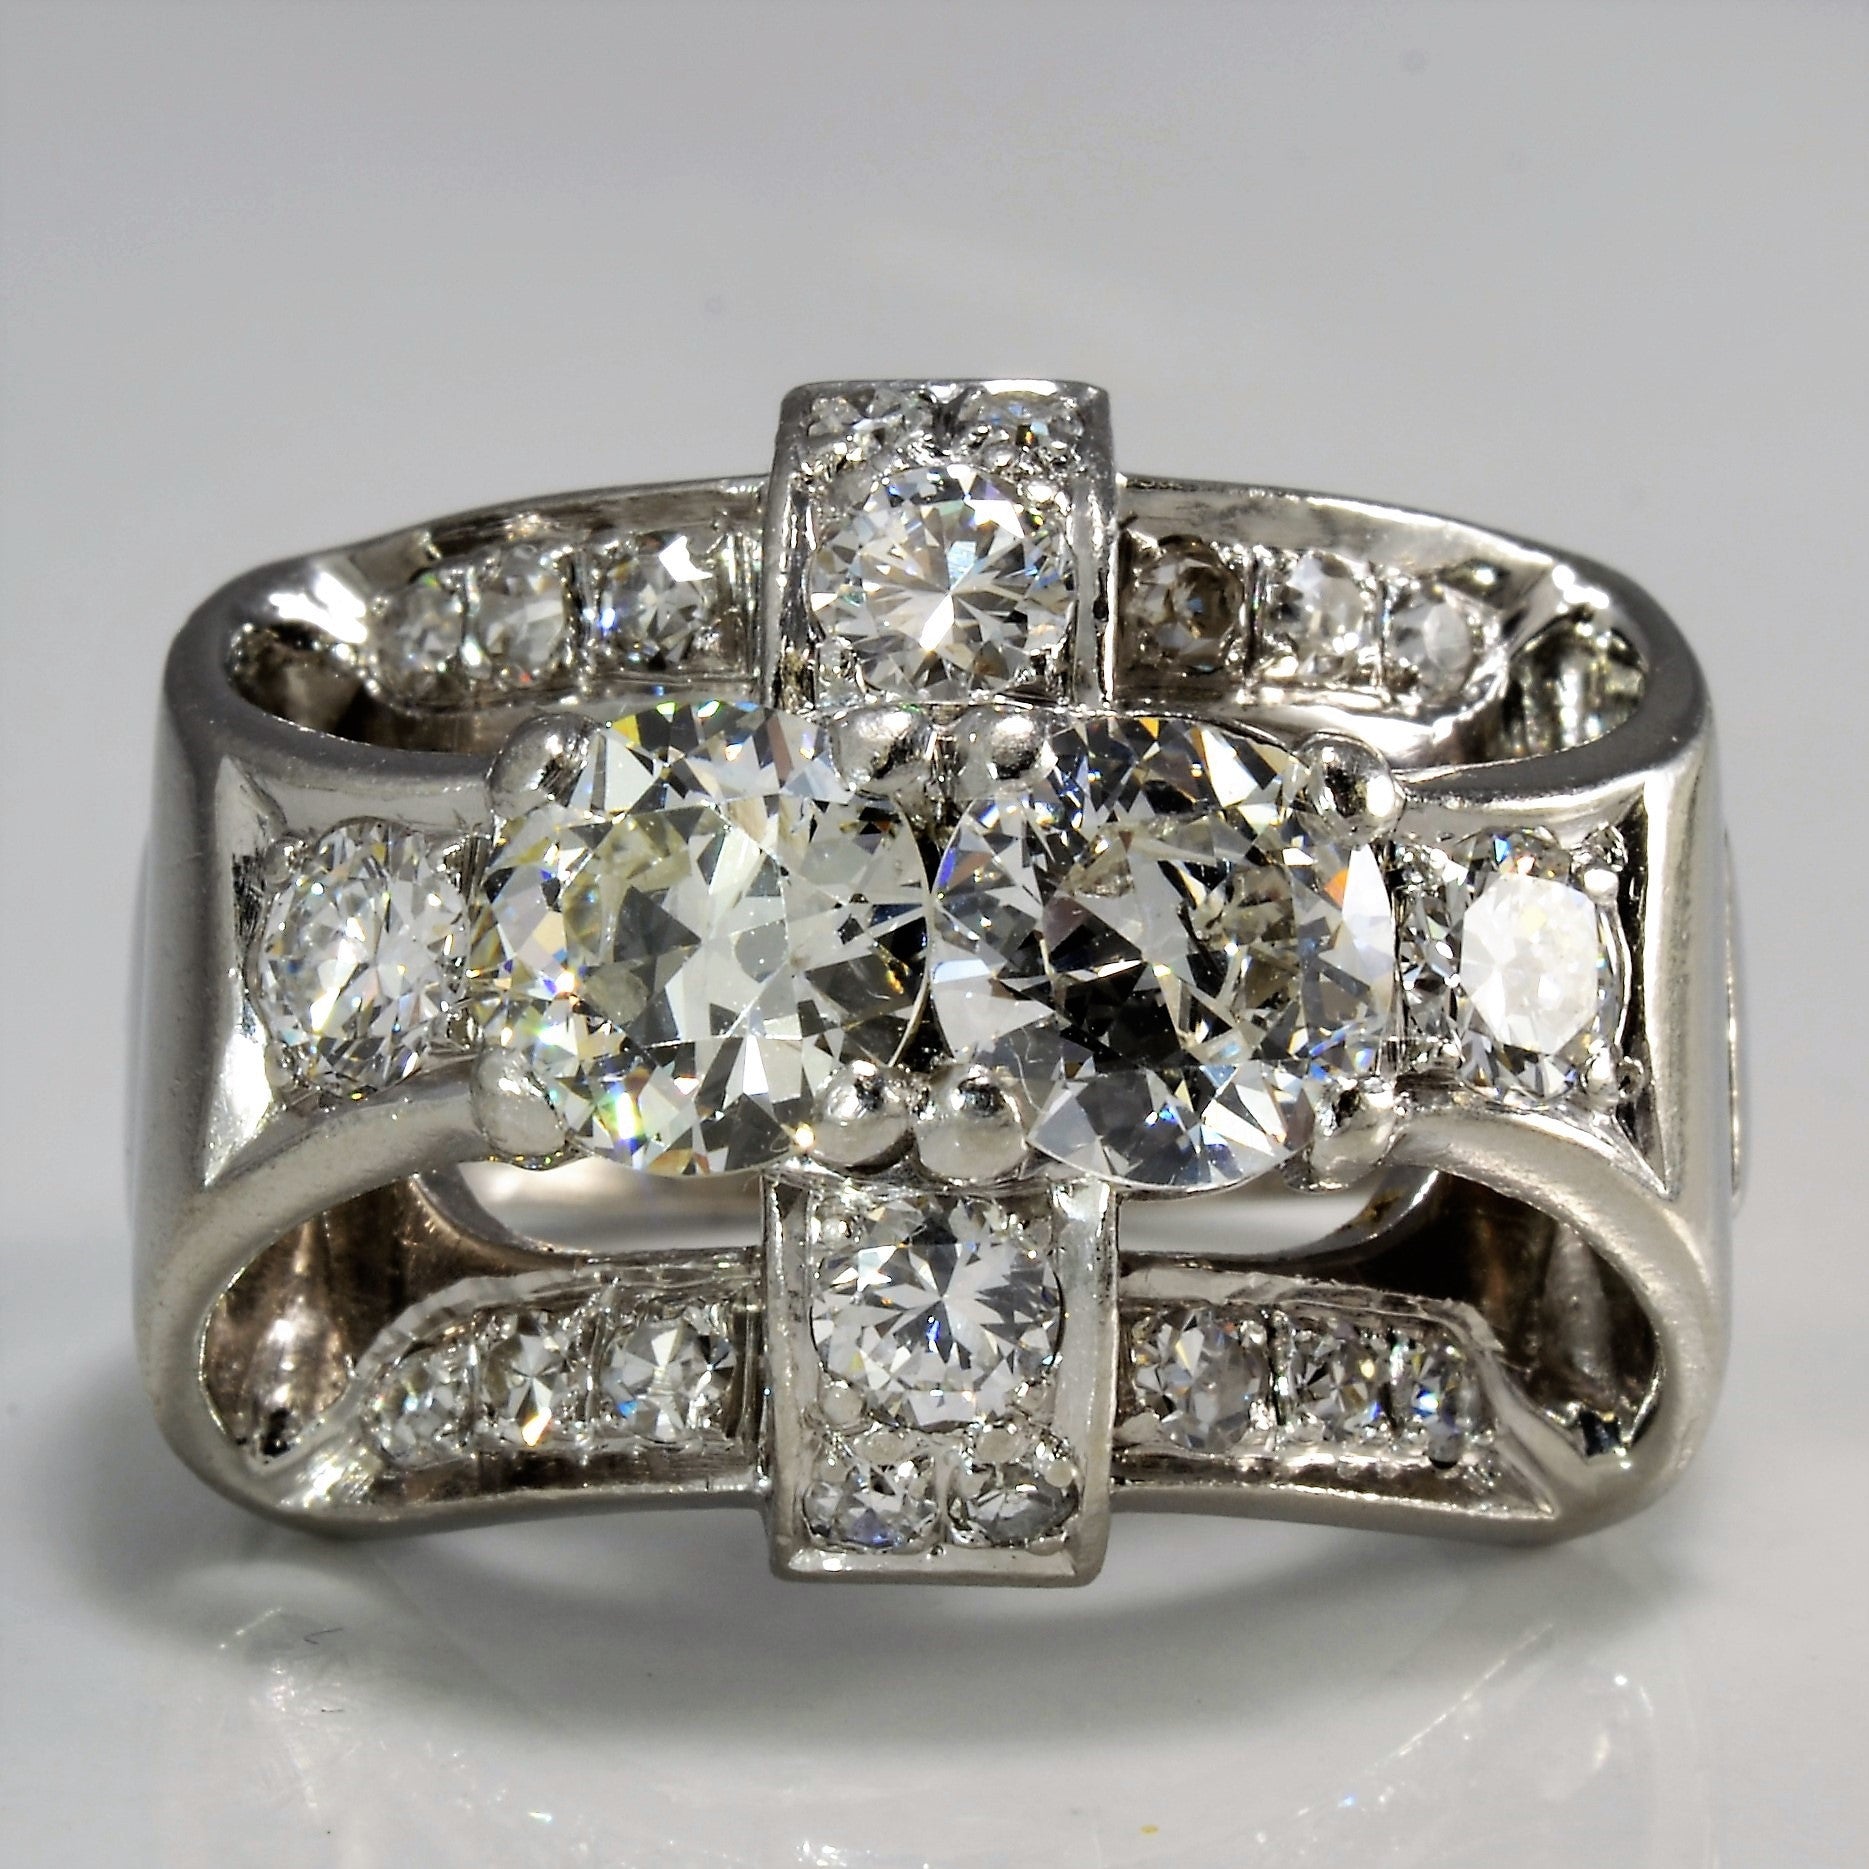 Old european cut diamond engagement ring, vintage engagement rings made of diamonds in Canada